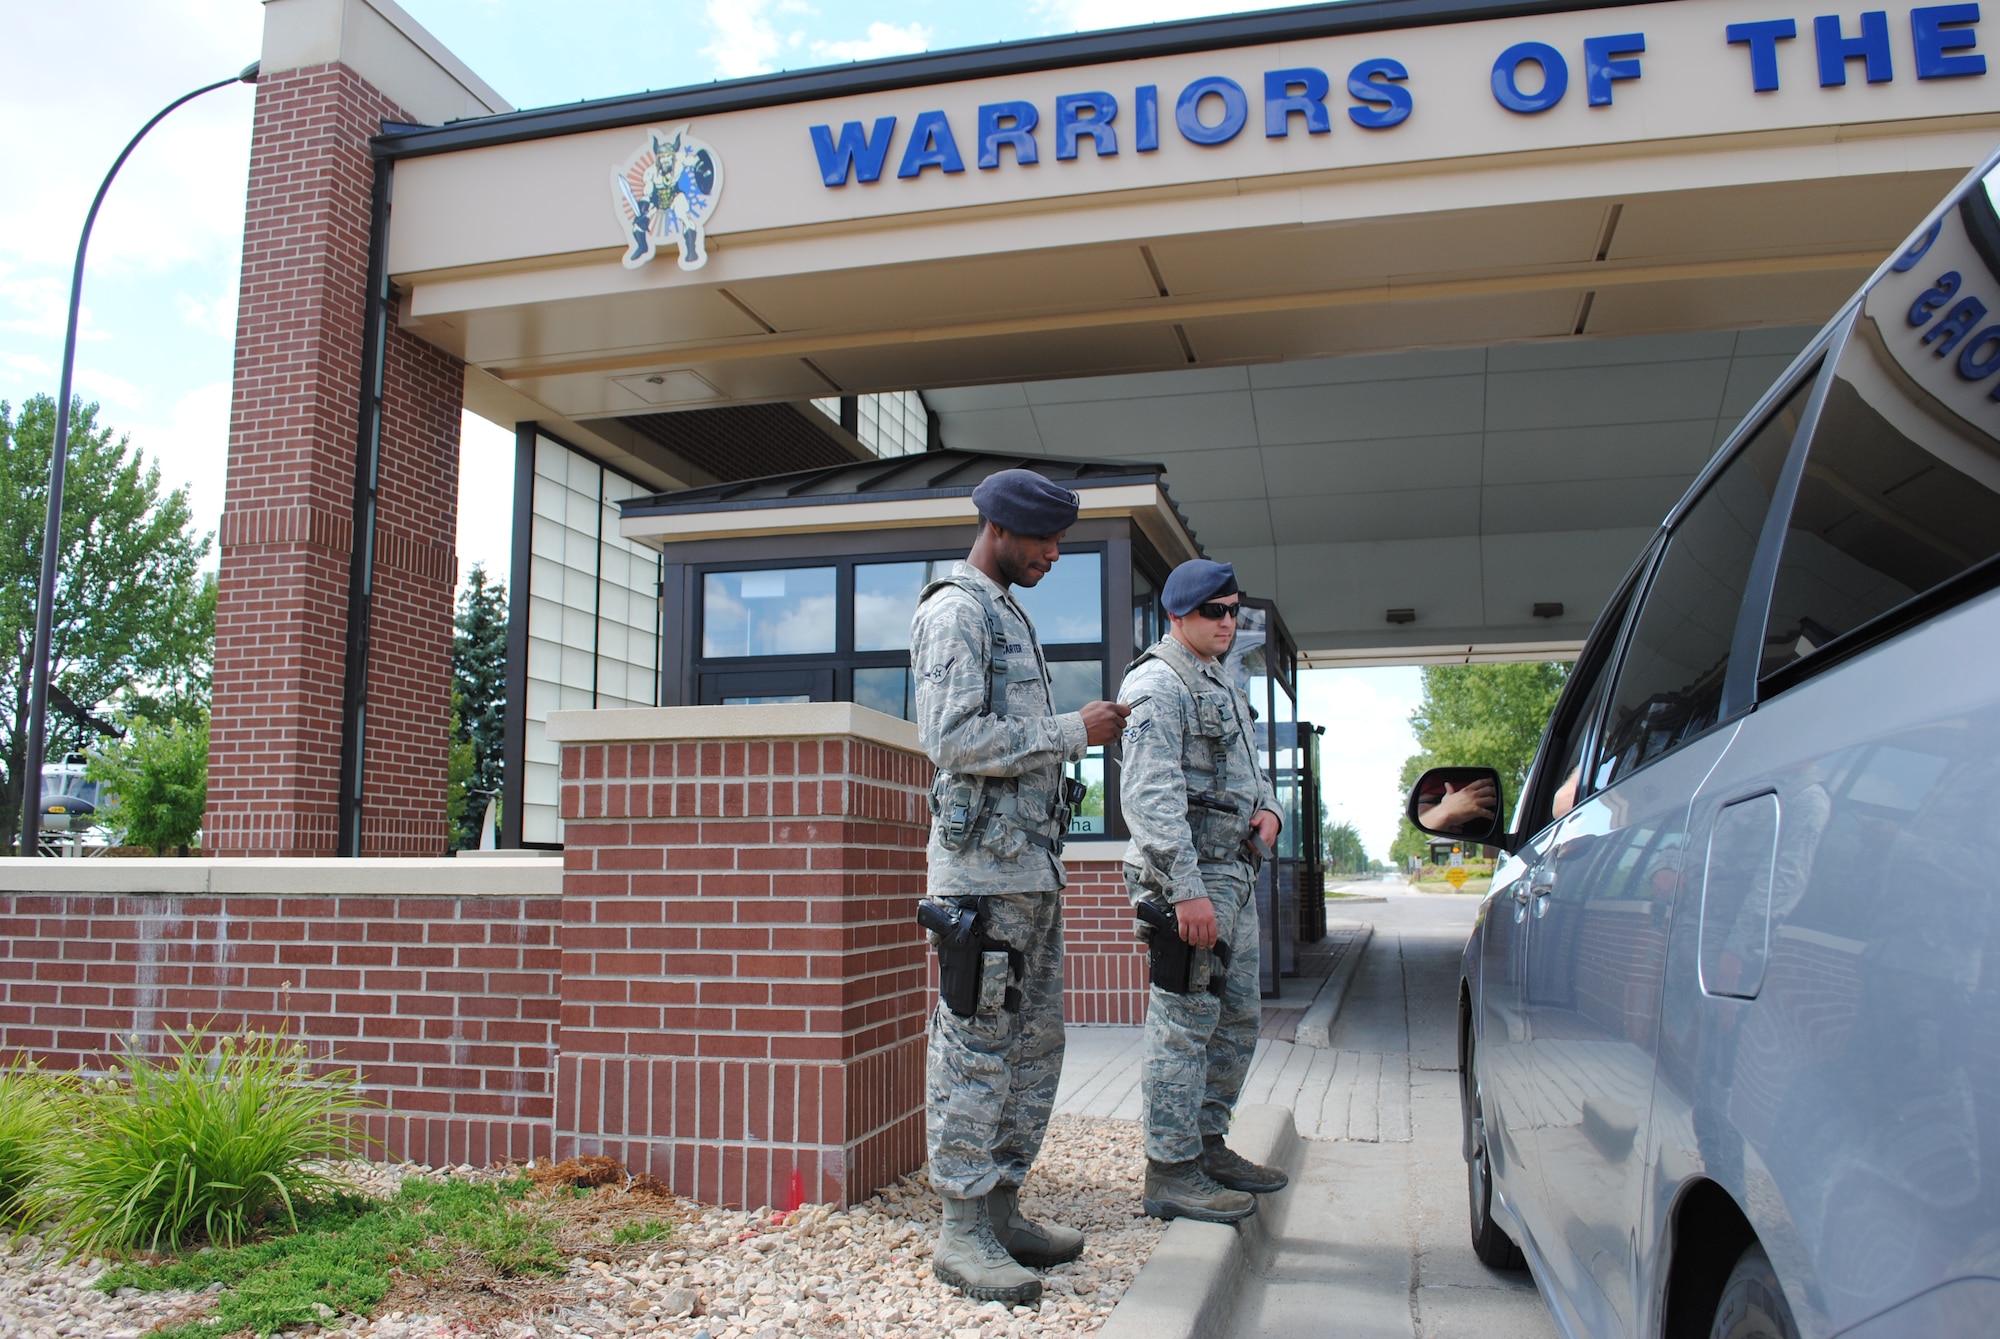 (From left) Airmen 1st Class Erik Carter and Jason Harvey verify the identification of a motorist arriving at the main gate of Grand Forks Air Force Base, N.D. , on Aug. 2, 2012. The two installation entry controllers from the 319th Security Forces Squadron were the first Airmen to monitor traffic flow in and out of base’s main gate after it reopened that day.  (U.S. Air Force photo/Senior Airman Luis Loza Gutierrez)